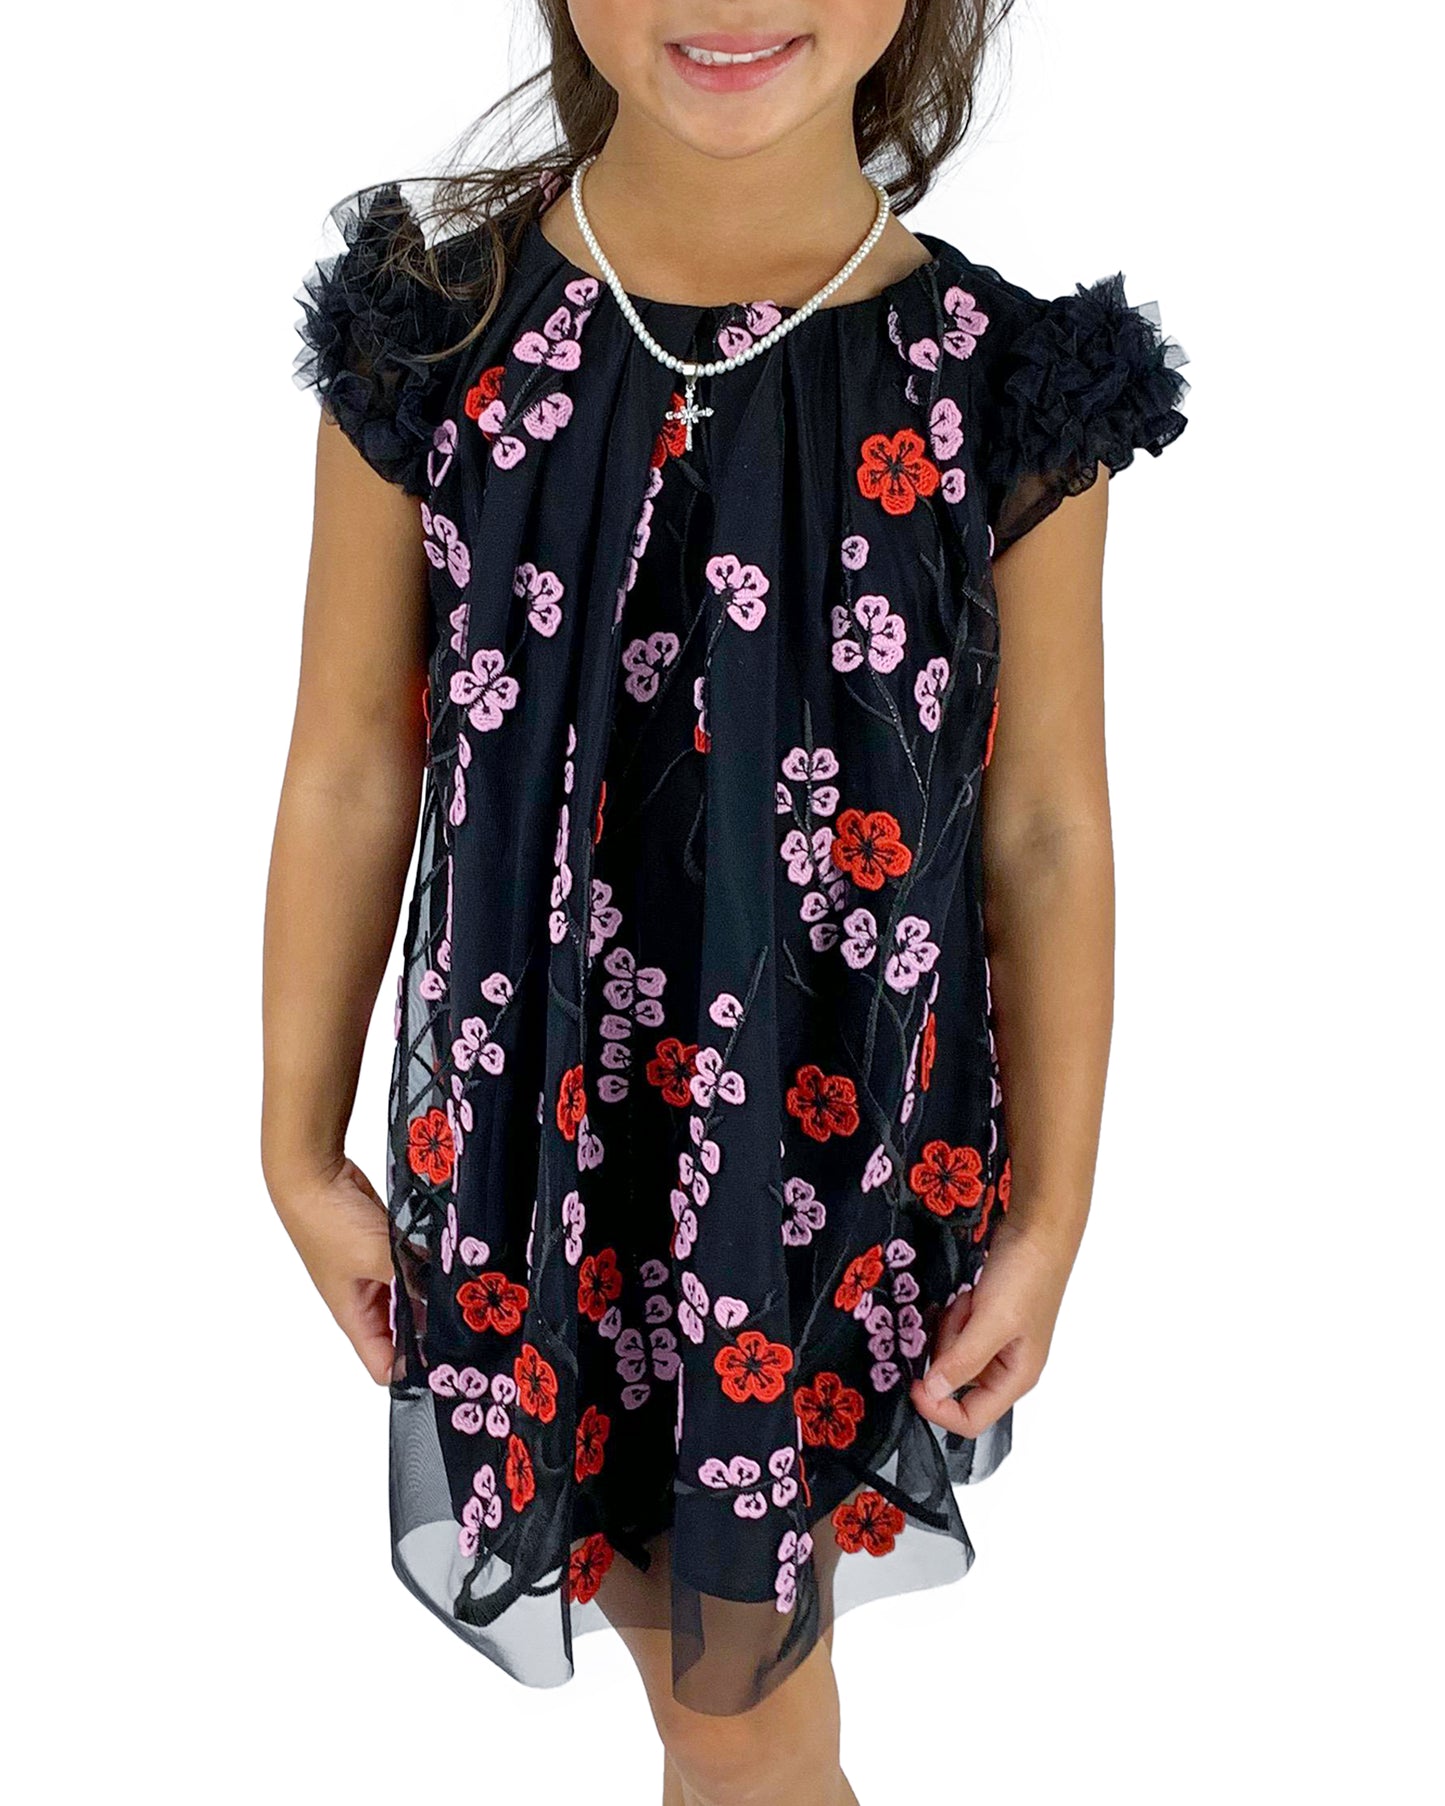 Helena and Harry Girl's Black/ Red/ Pink Embroidered Floral Tuelle Dress